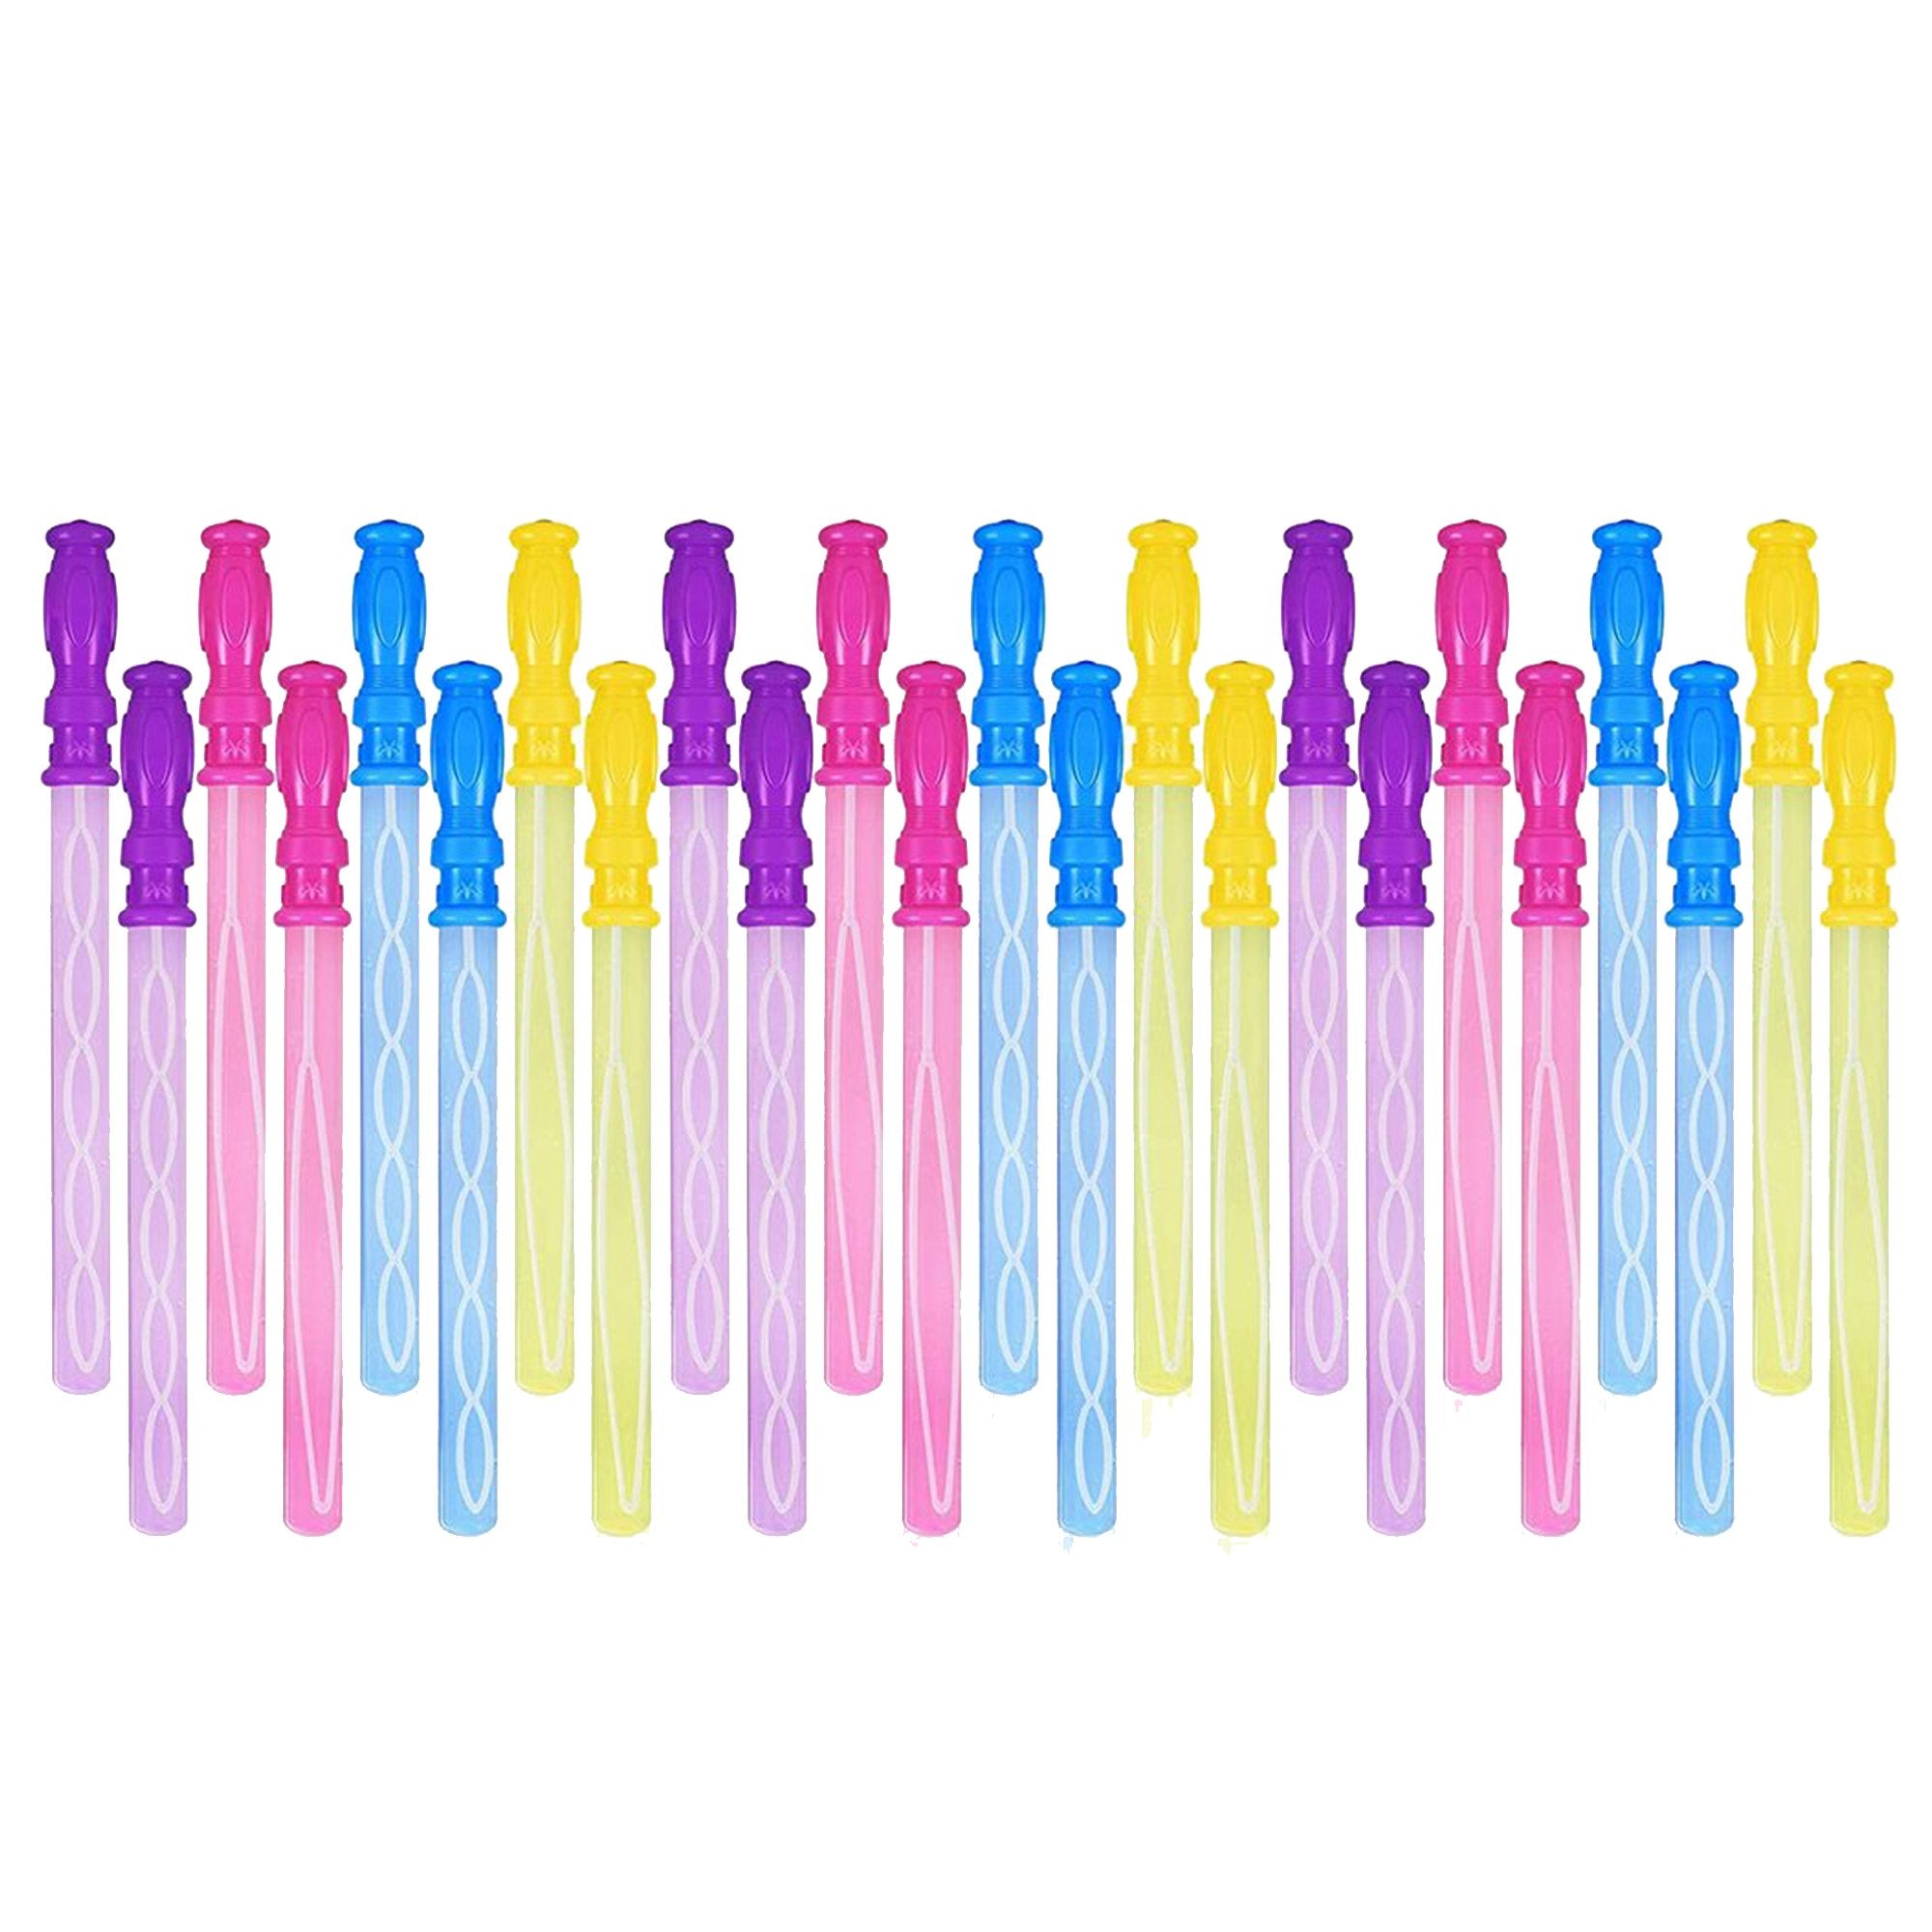 7607 Bubble Stick with Windmill Fan Toy for Kids (Multicolors, Pack of 24) - SkyShopy